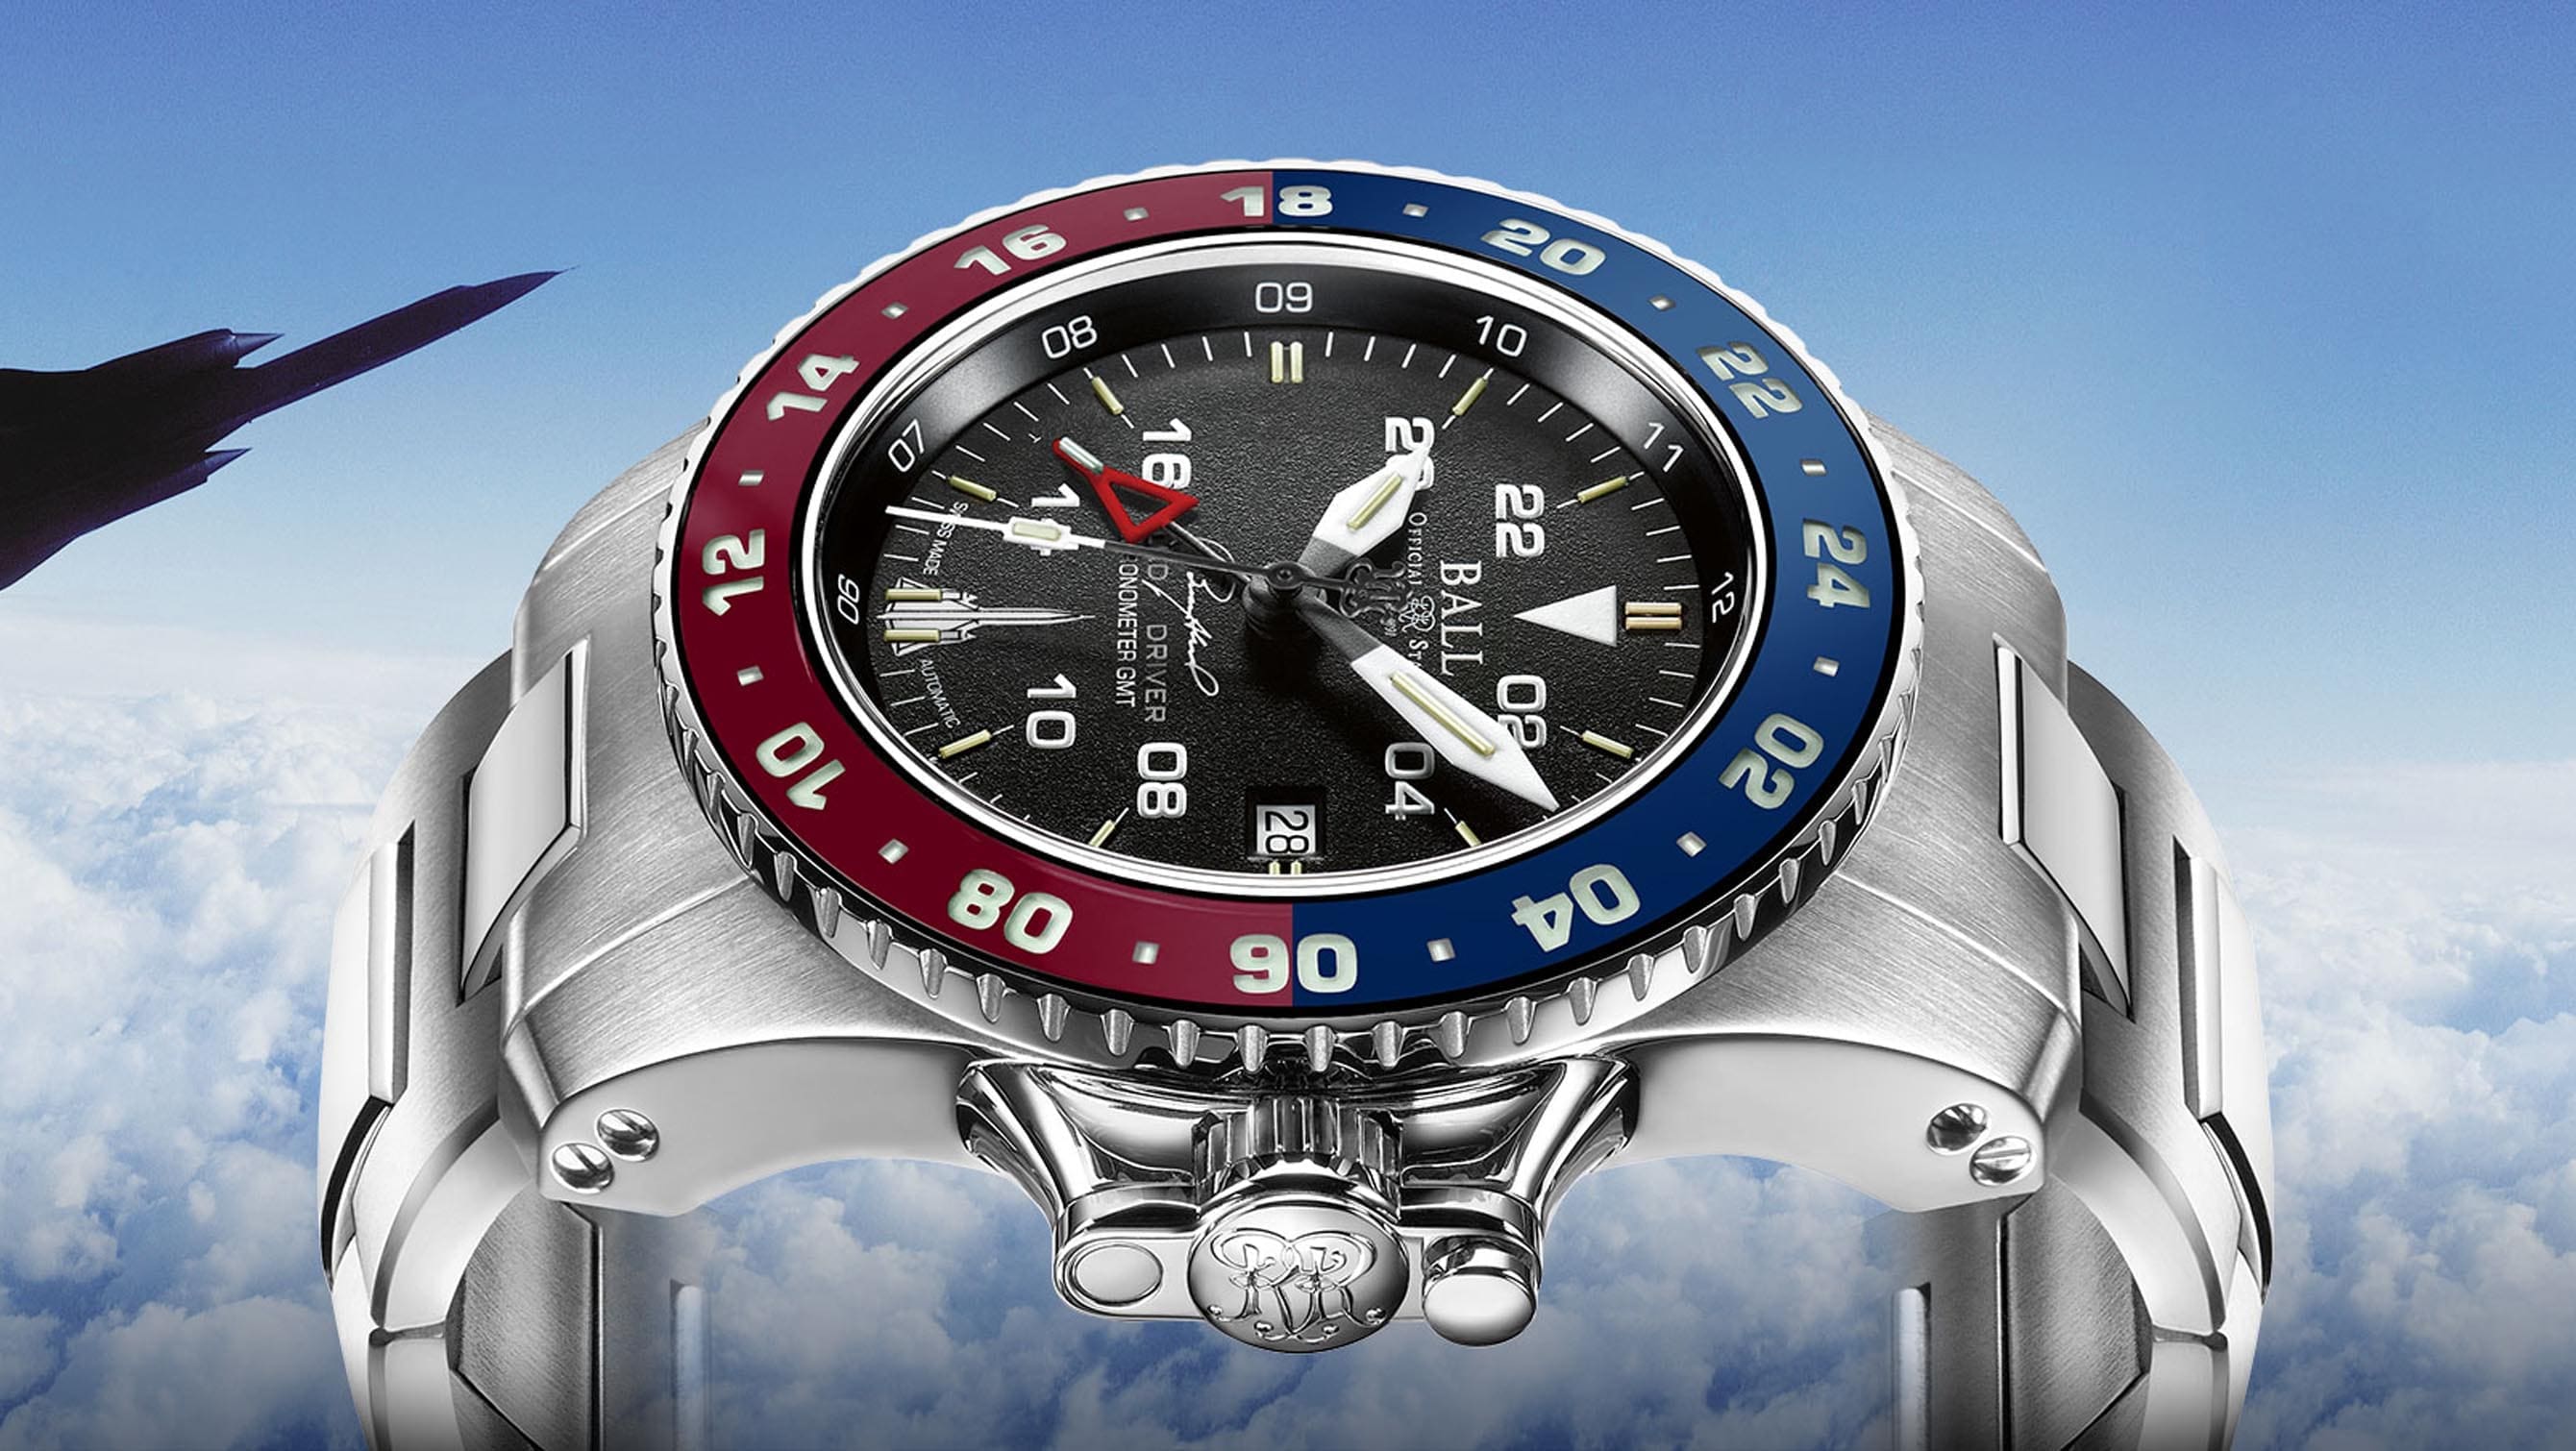 The Ball Engineer Hydrocarbon AeroGMT Sled Driver honours a legendary pilot